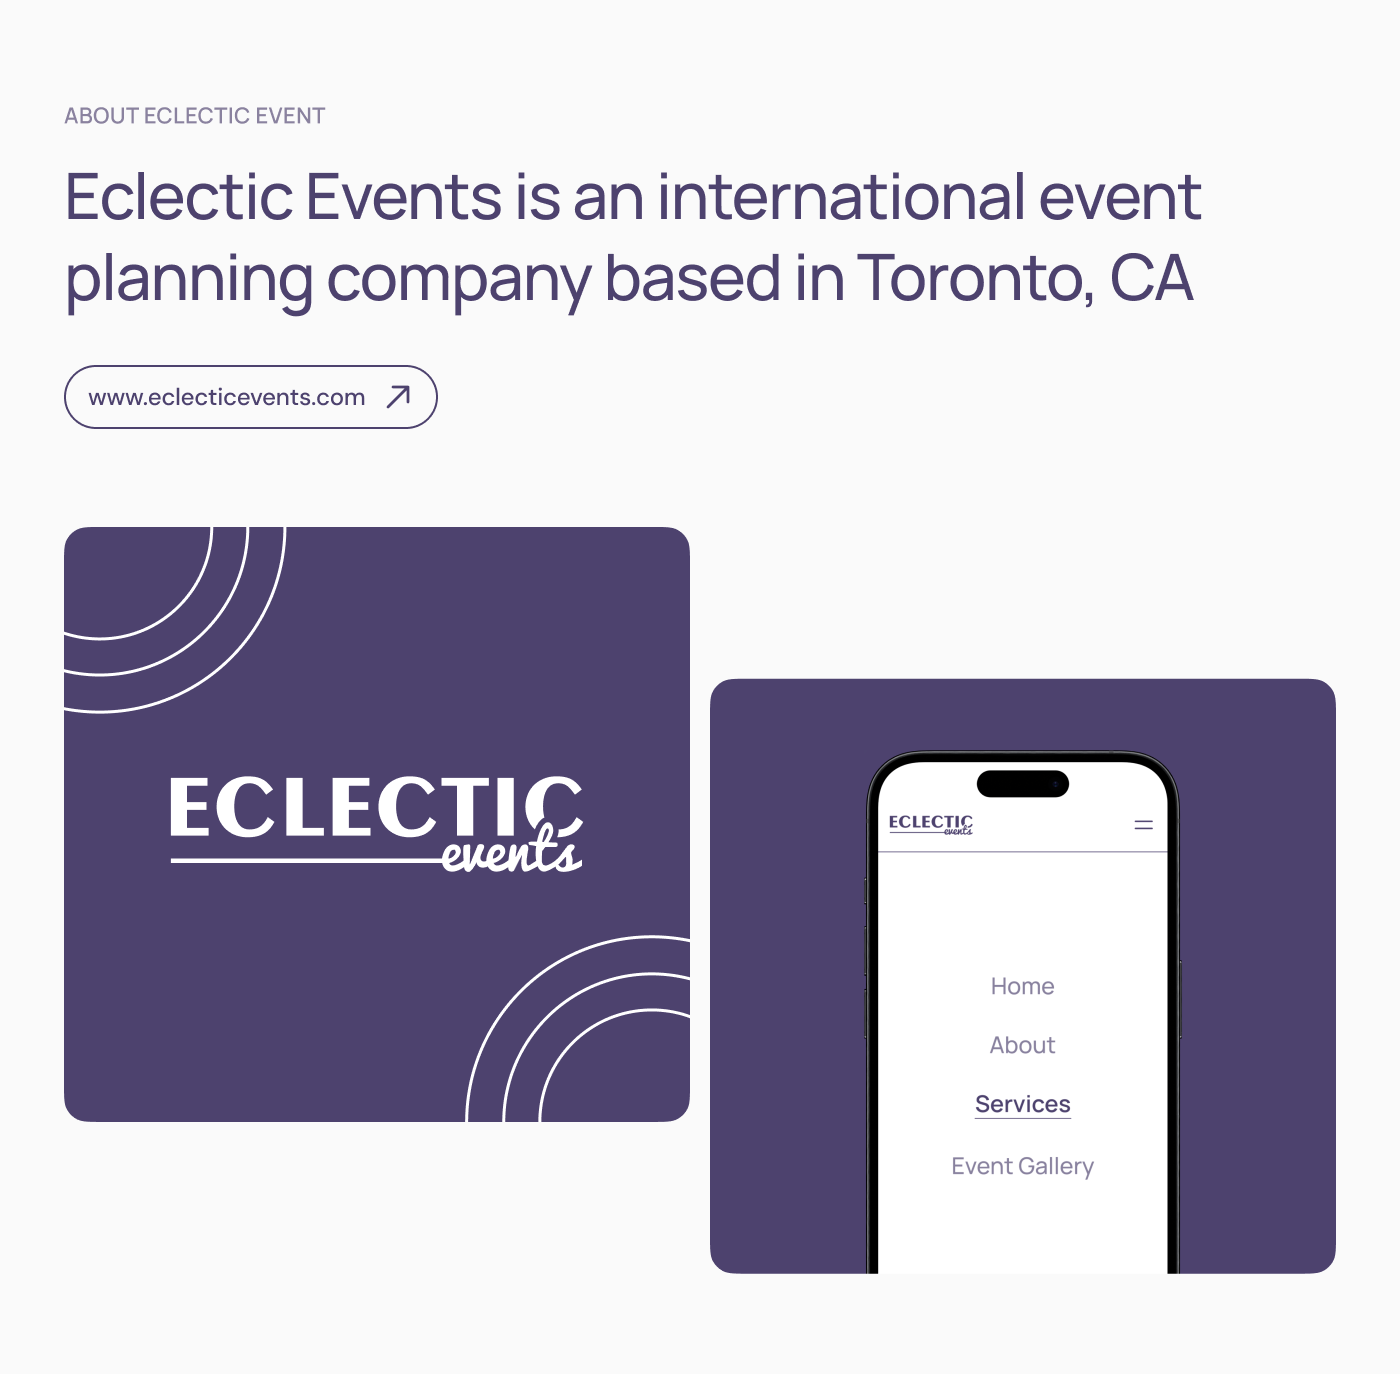 This section is about Eclectic Events an international event planning company. It has there logo.